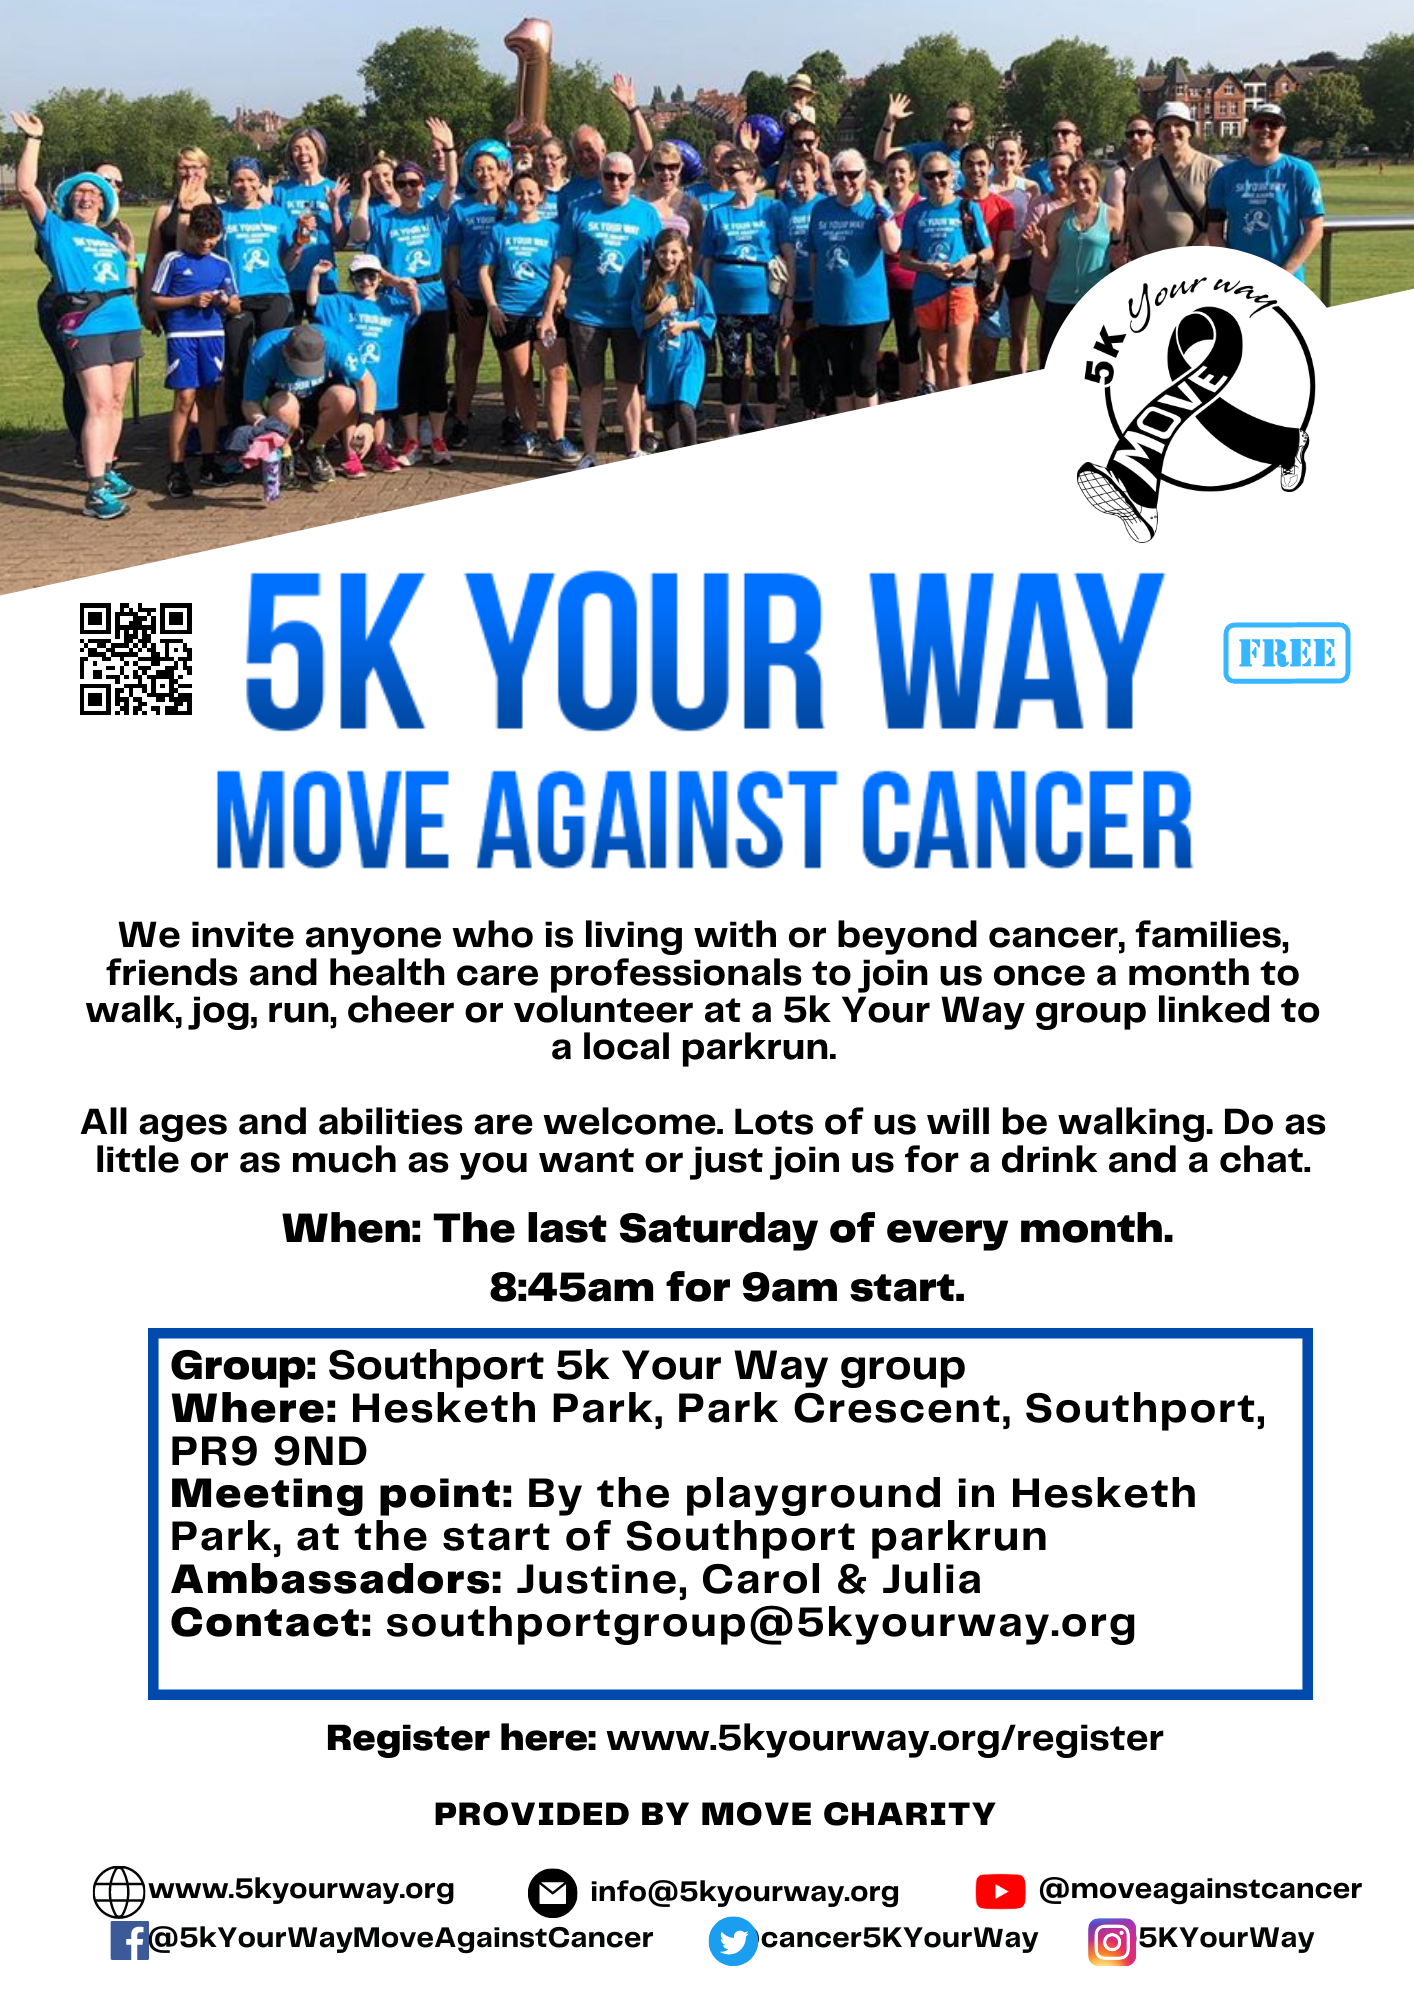 5K Your Way, Move Against Cancer